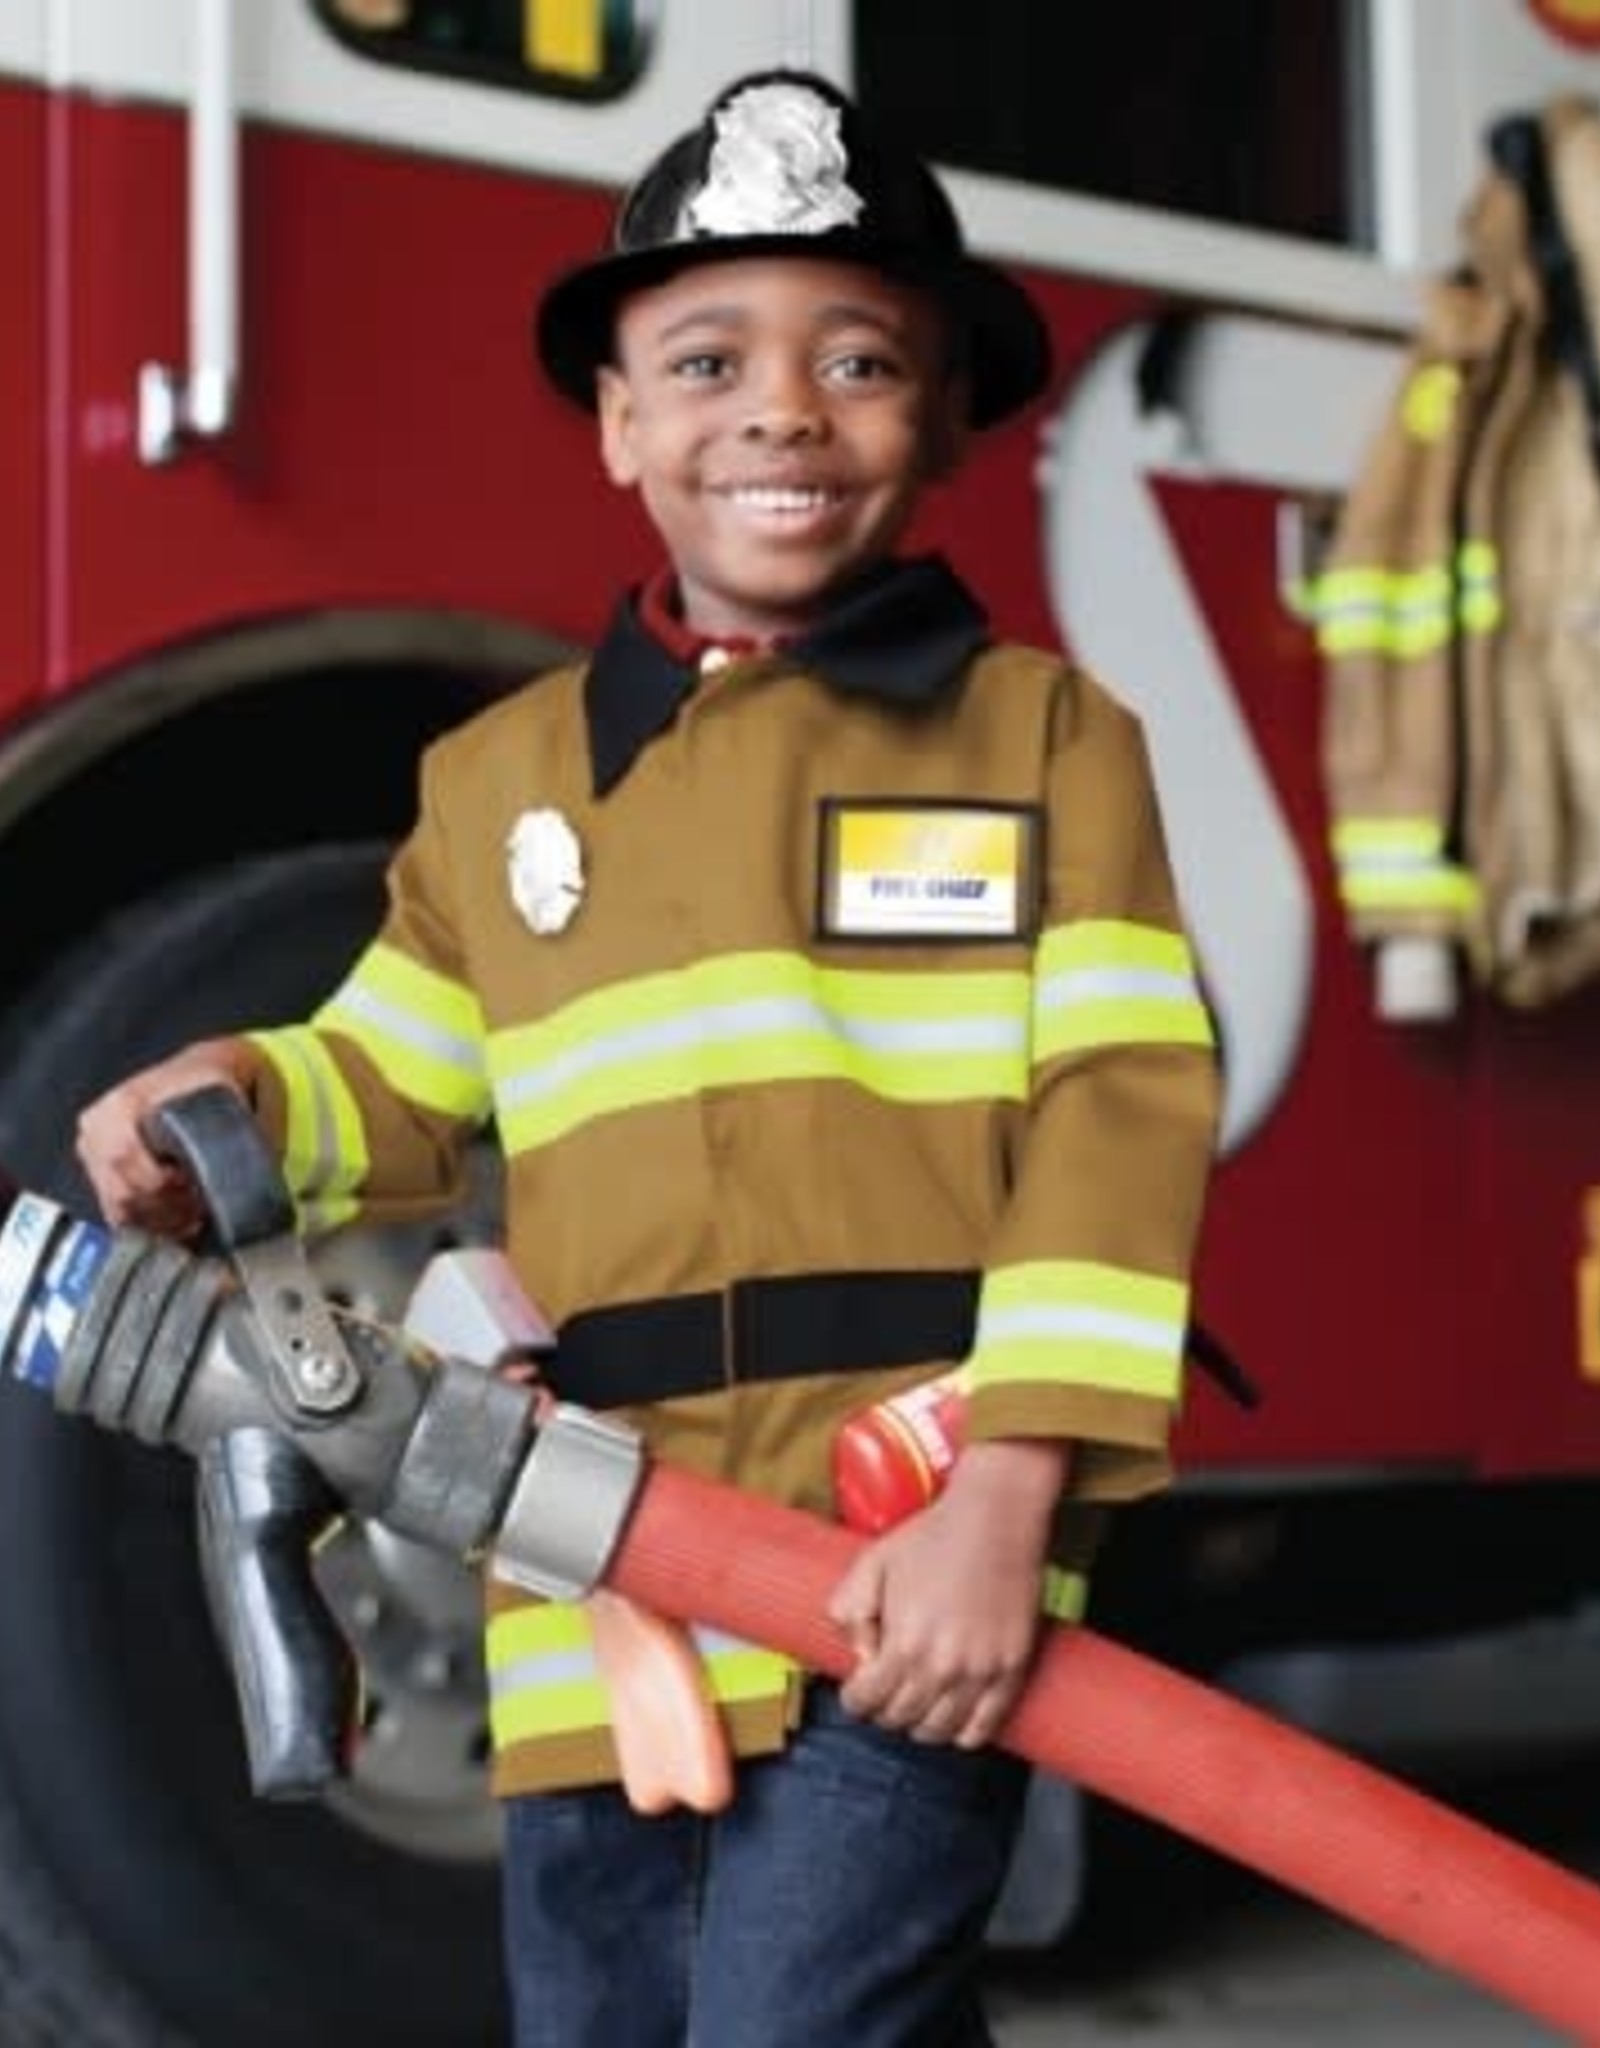 Great Pretenders Firefighter Set, Includes 5 Accessories, Tan, Size 5-6